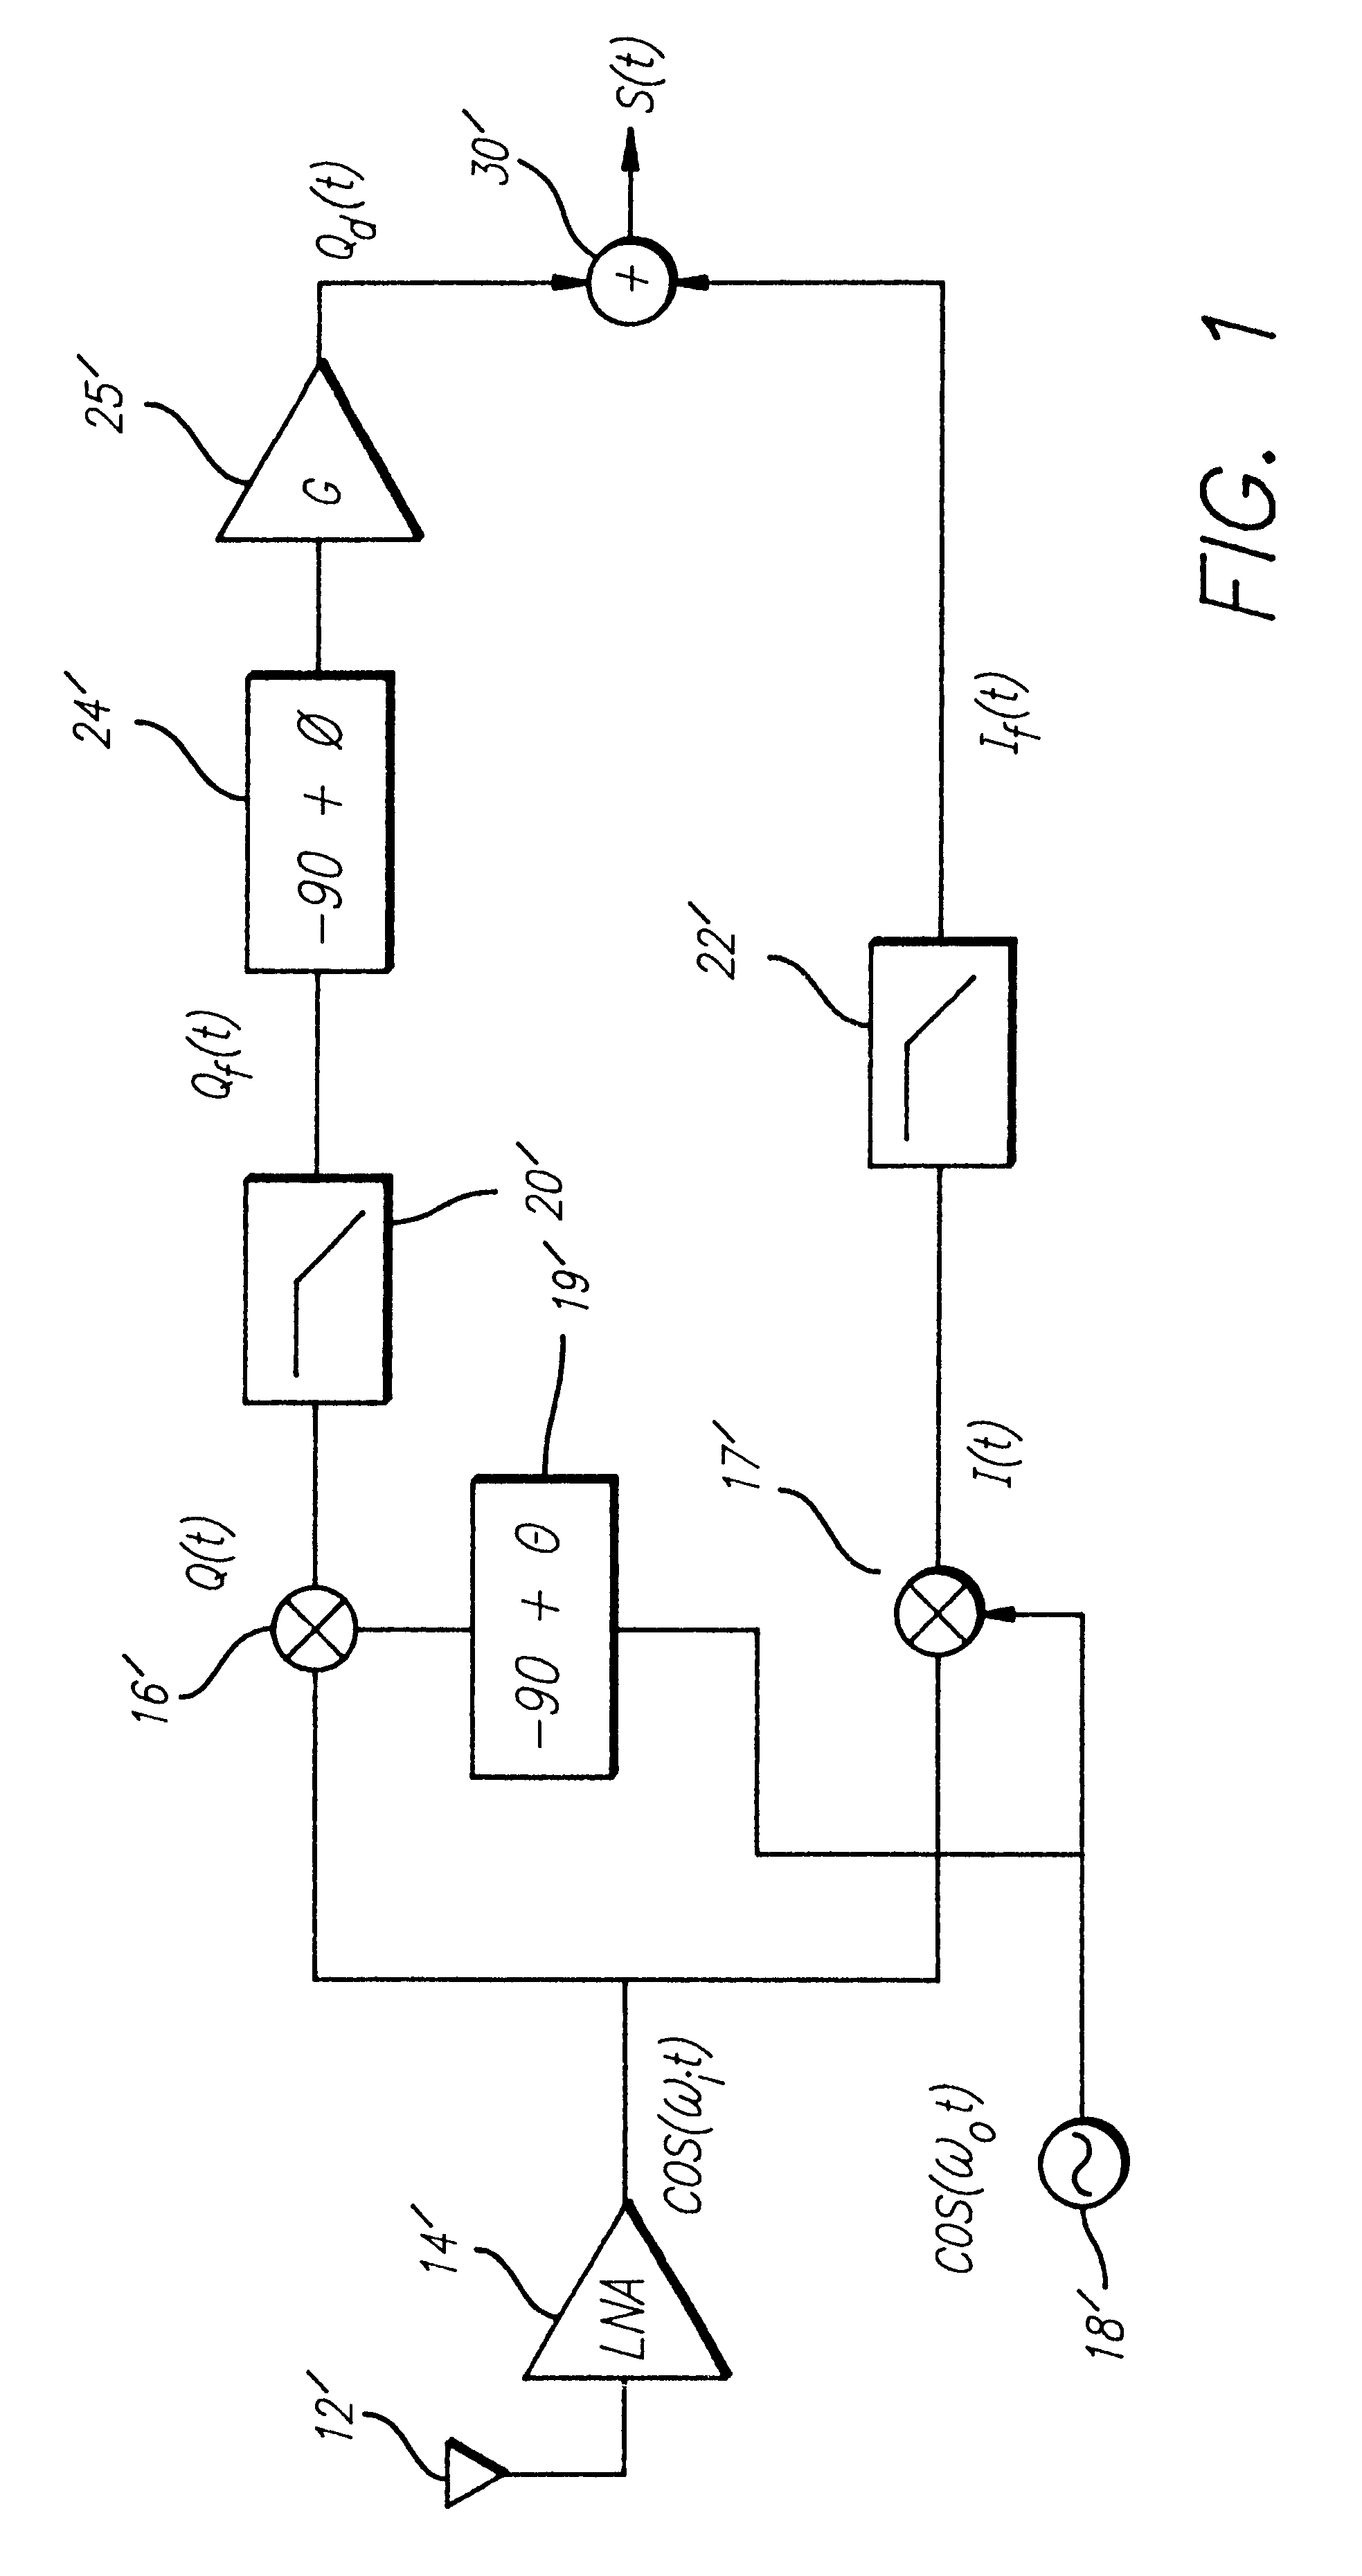 Wideband IF image rejecting receiver